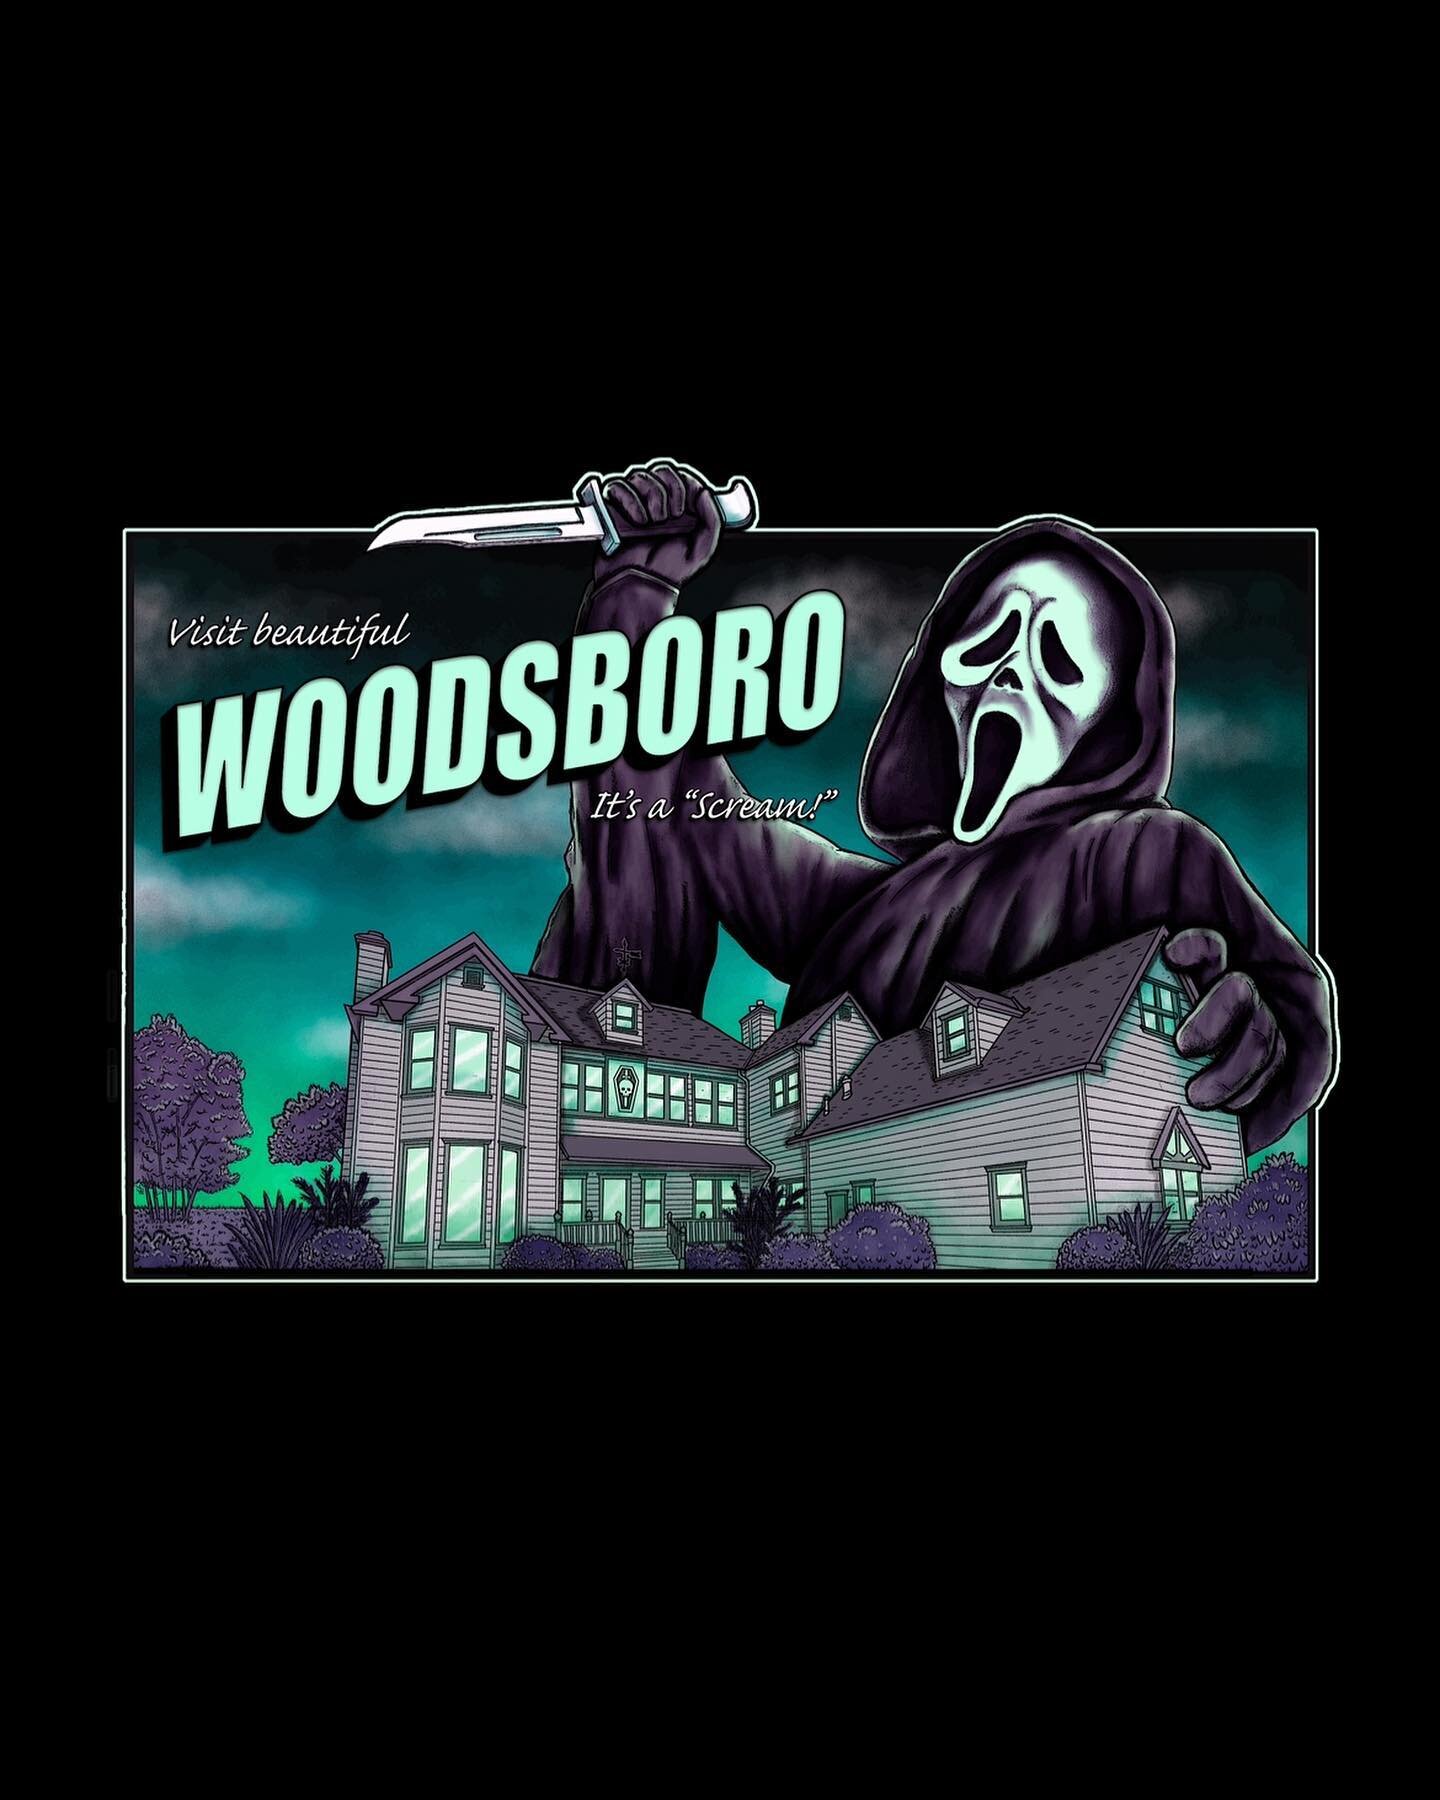 It&rsquo;s #SCREAM day! On my way to go check out Scream VI! While I&rsquo;m there, why don&rsquo;t you check out our new &ldquo;Visit Beautiful Woodsboro&rdquo; tee over at @foolishmortalsupply it&rsquo;s a scream!
.
.
.
#scream6 #screamshirt #horro